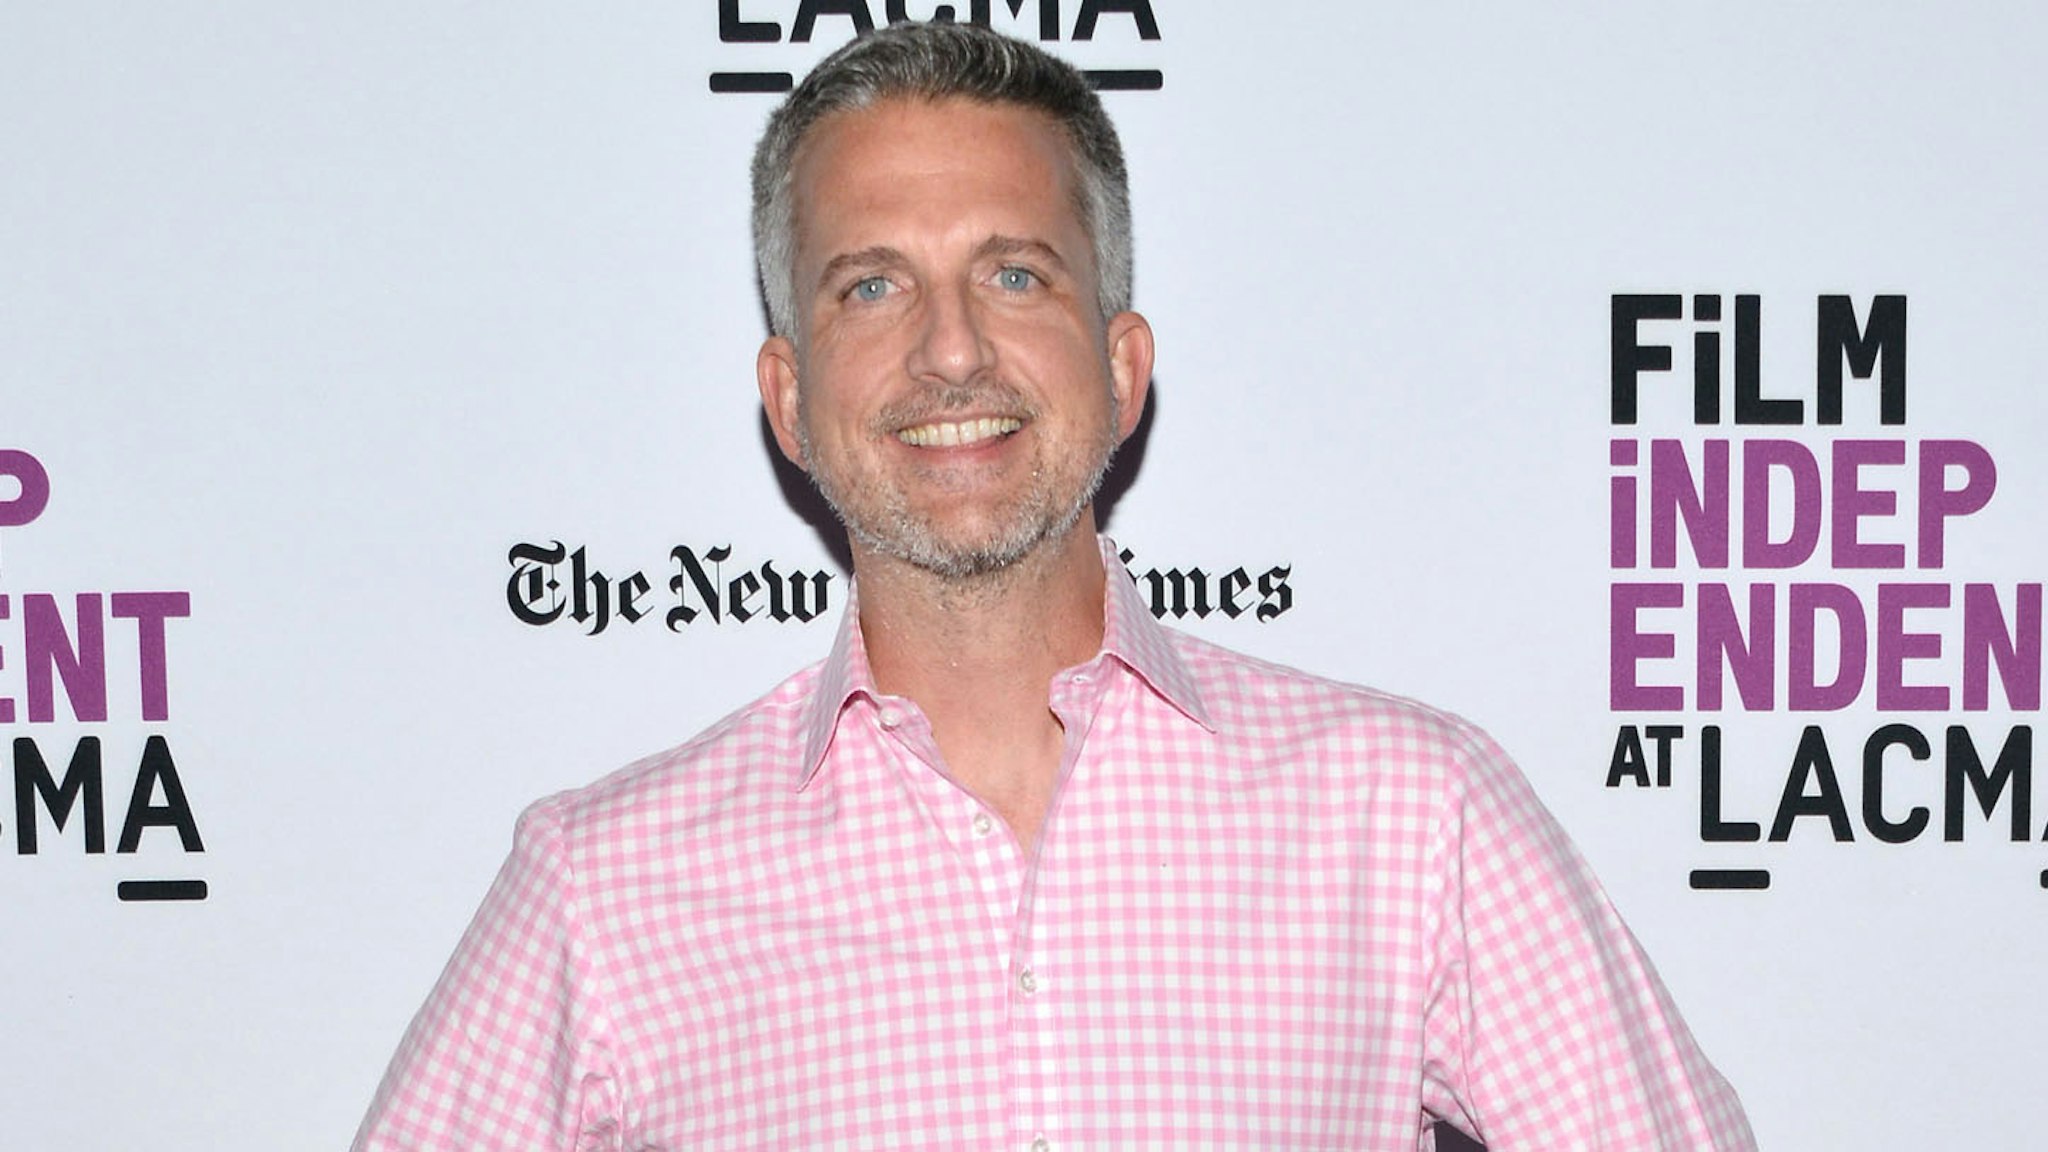 LOS ANGELES, CA - APRIL 21: Bill Simmons attends the Film Independent at LACMA presents Live Read of "Thnk You For Smoking" and After Party at Bing Theatre At LACMA on April 21, 2016 in Los Angeles, California.